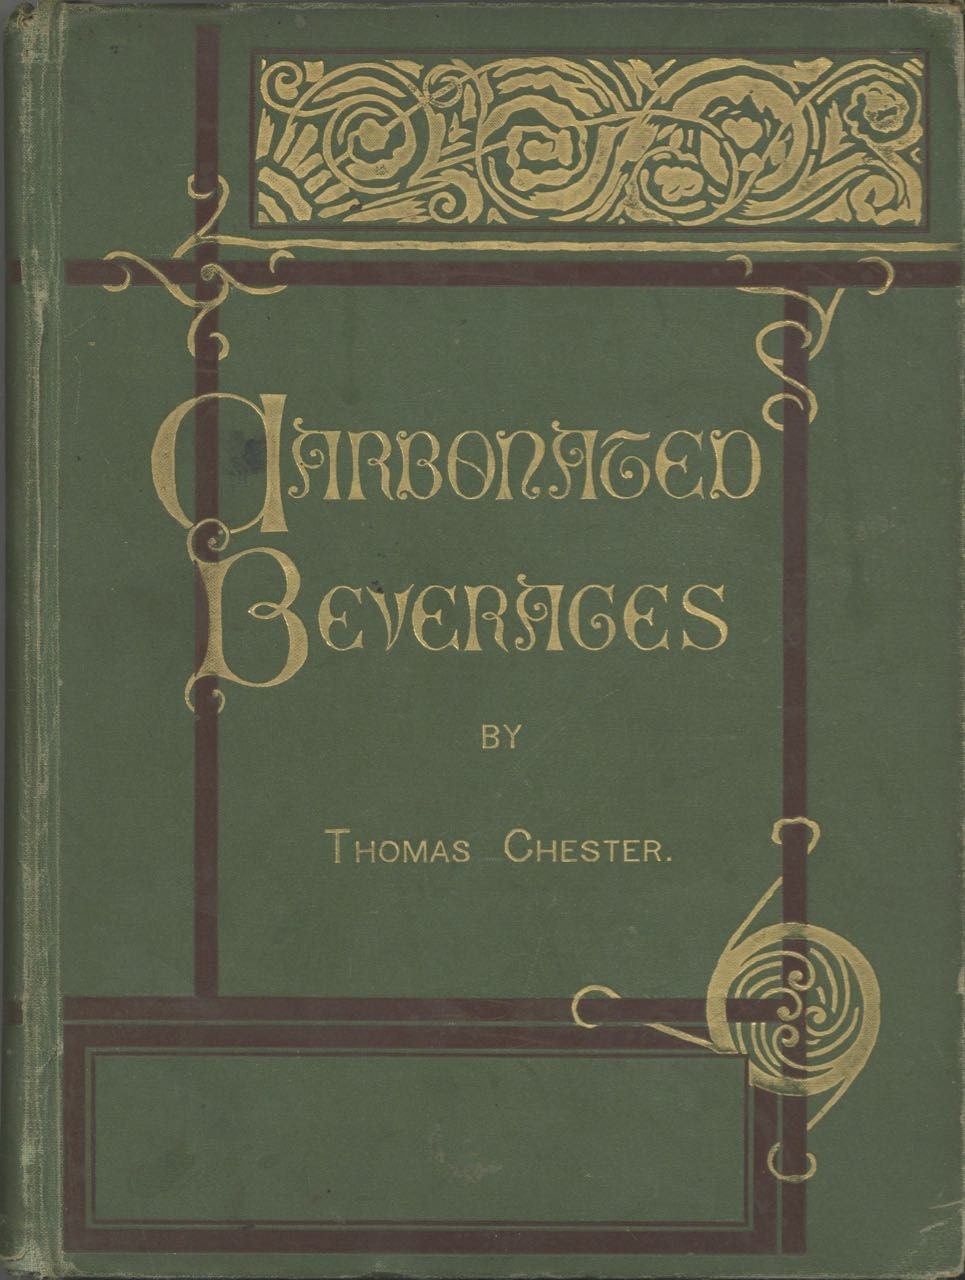 Item #6662 Carbonated Beverages. The art of making, dispensing & bottling soda-water, mineral-waters, ginger-ale & sparkling-liquors. [issued together with:] Catalogue of apparatus, materials, and accessories, for making bottling, and dispensing Carbonated Beverages, including soda-water, mineral spirits, & sparkling liquors. Trade catalogue – Soda fountains, Thomas Chester, Firm of John Matthews.